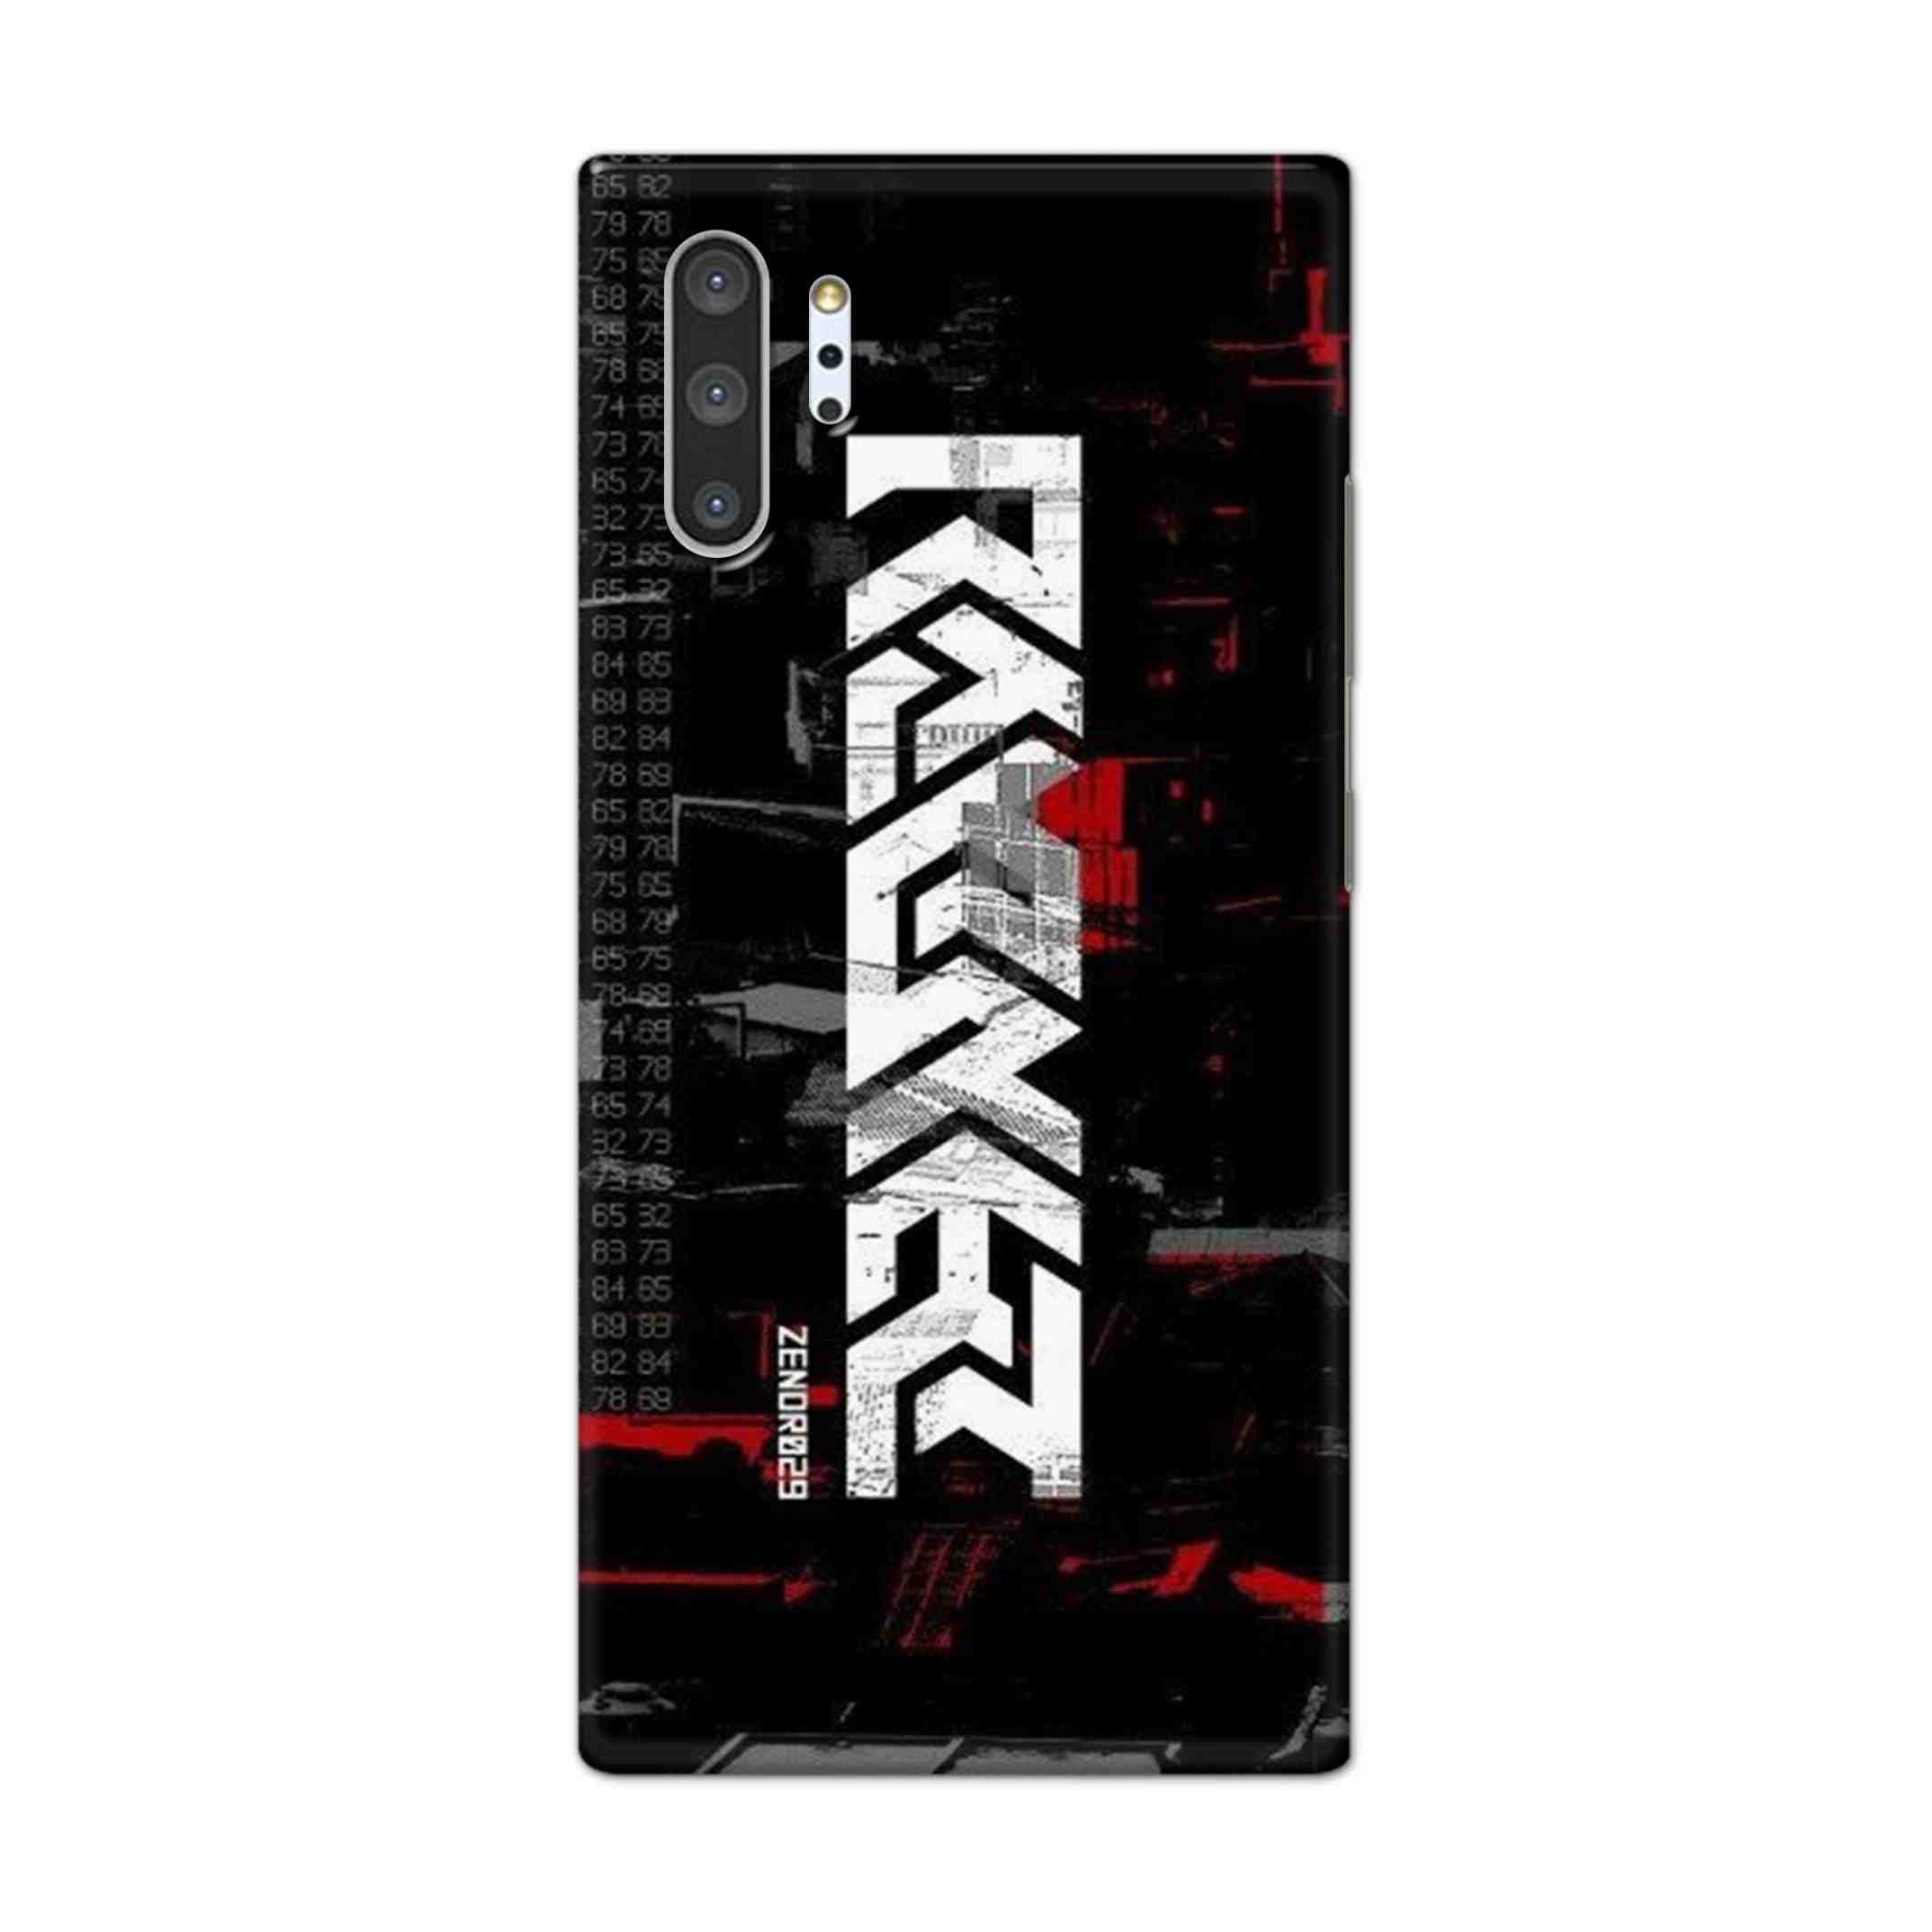 Buy Raxer Hard Back Mobile Phone Case Cover For Samsung Galaxy Note 10 Pro Online